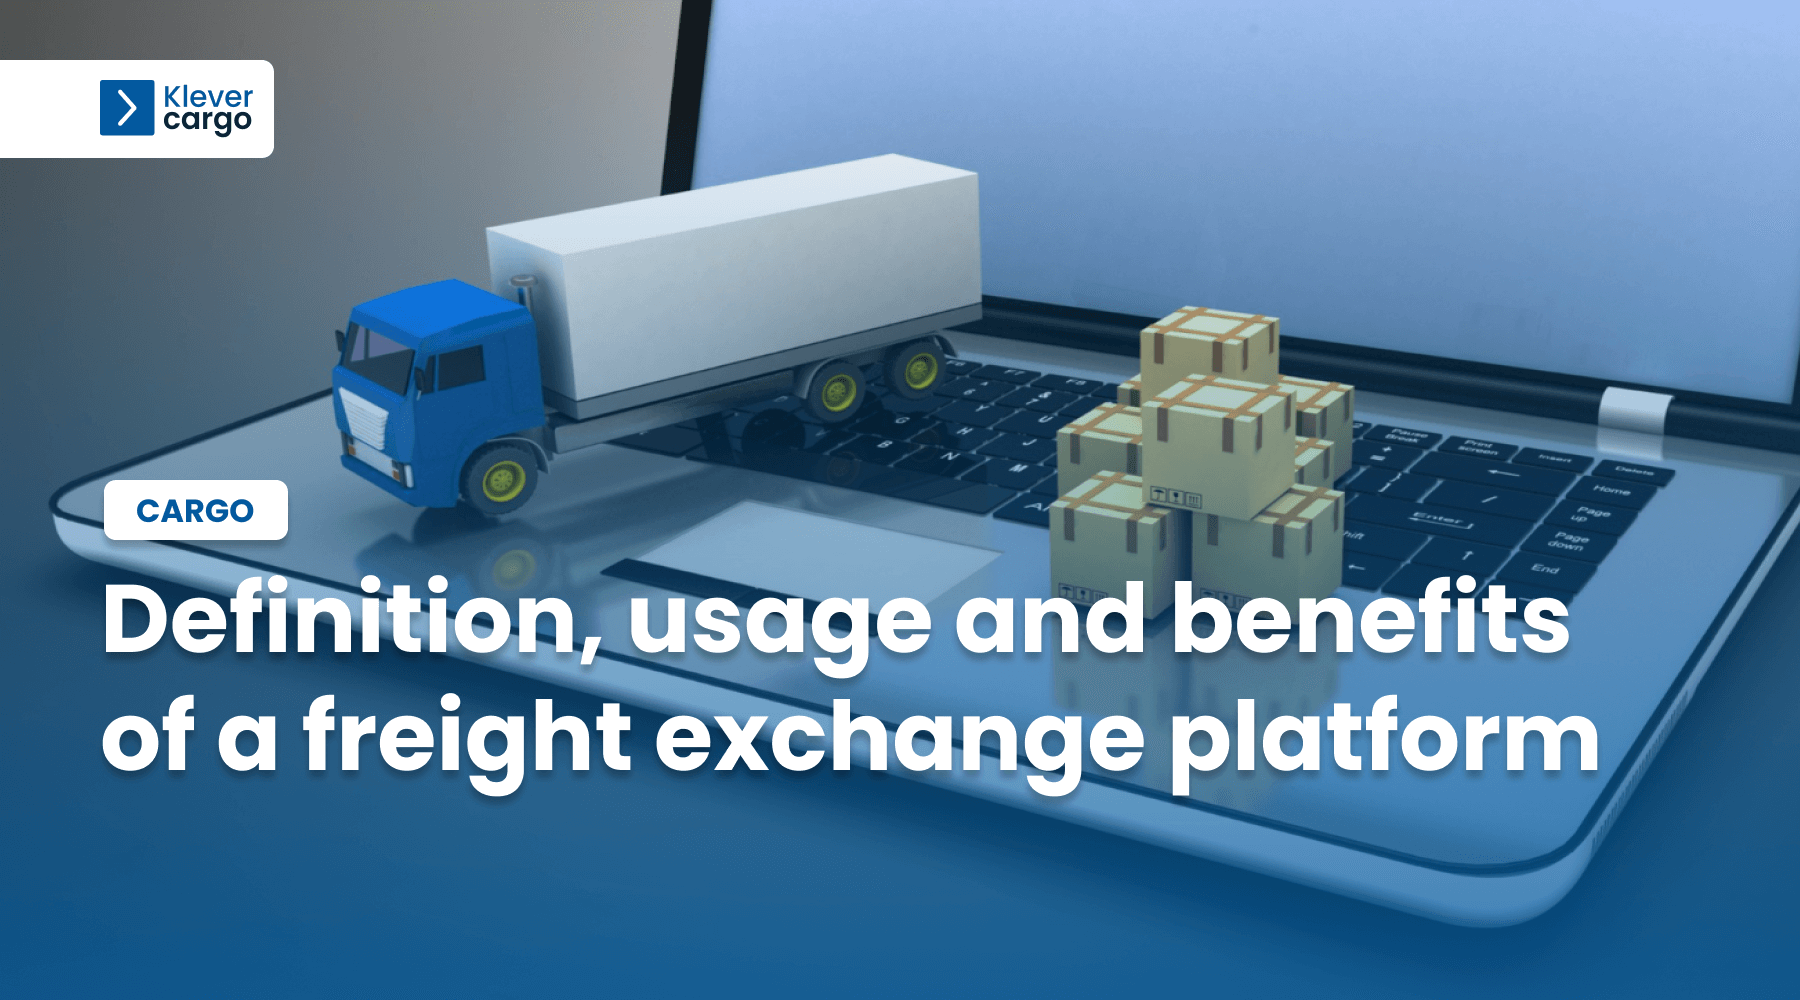 Freight exchange